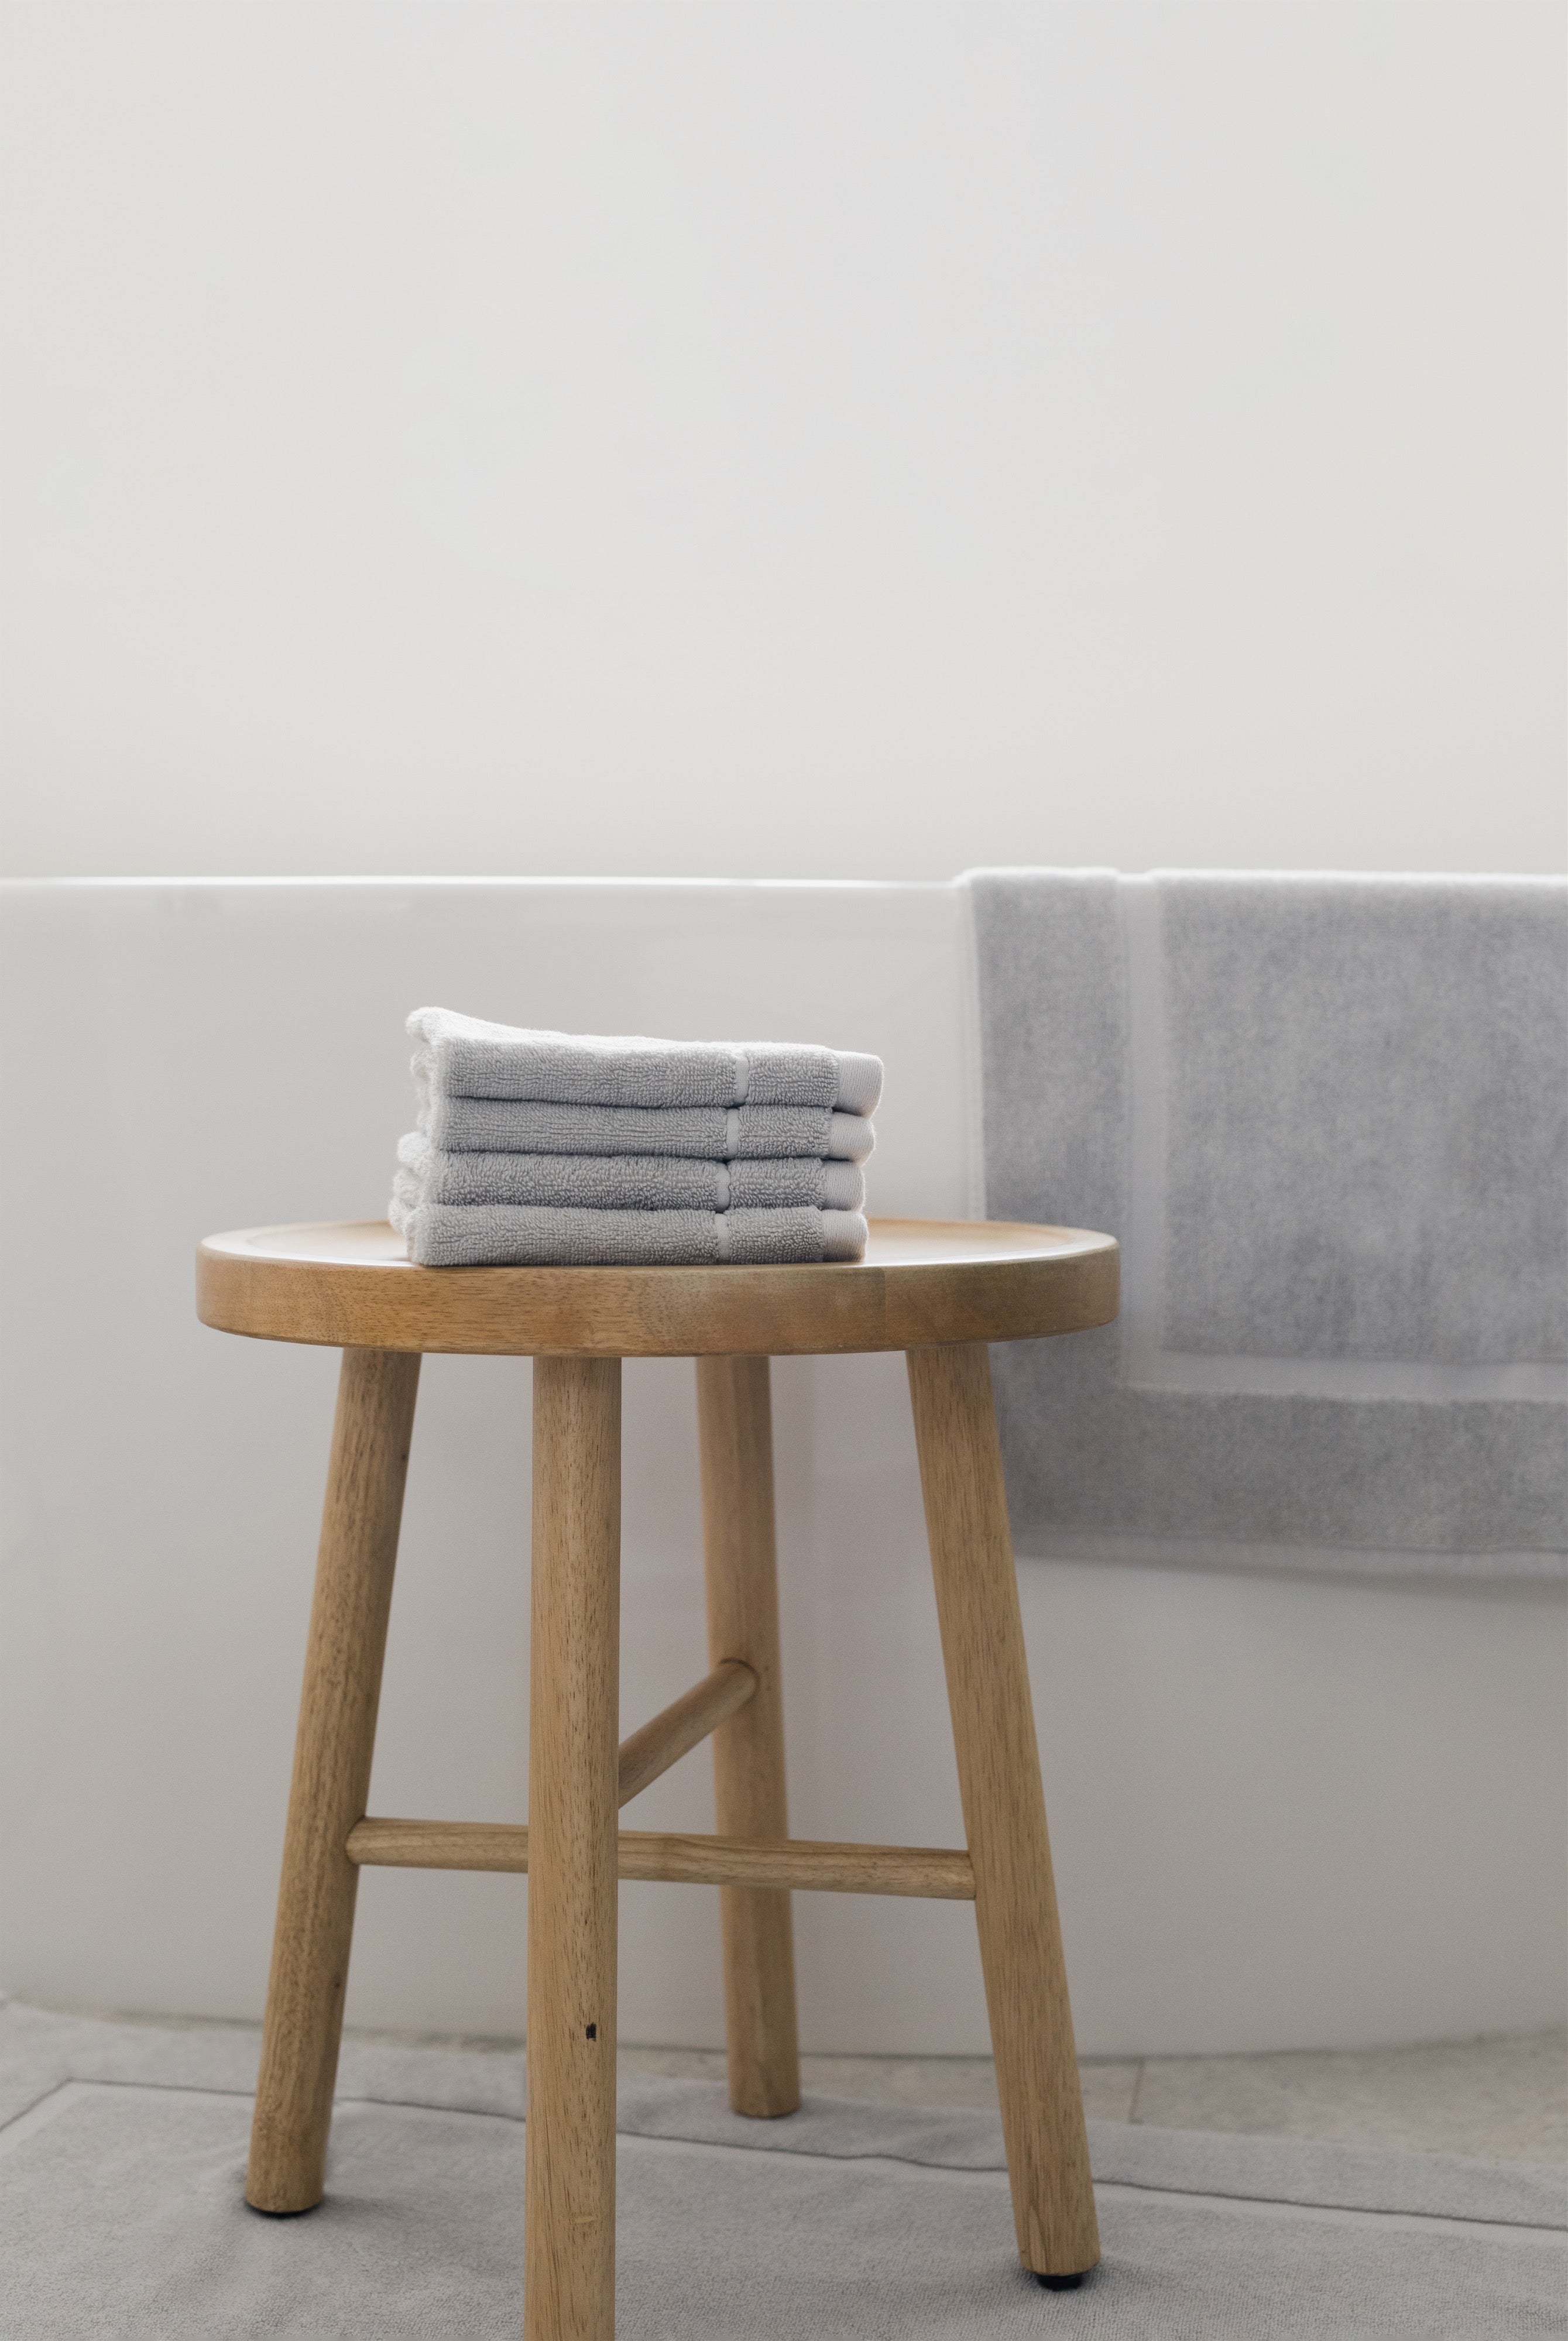 Light Grey Premium Plush Bath Mat resting on white bathtub. The photo was taken in a bathroom showing a wooden stool with wash cloths next to the bathtub.|Color:Light Grey